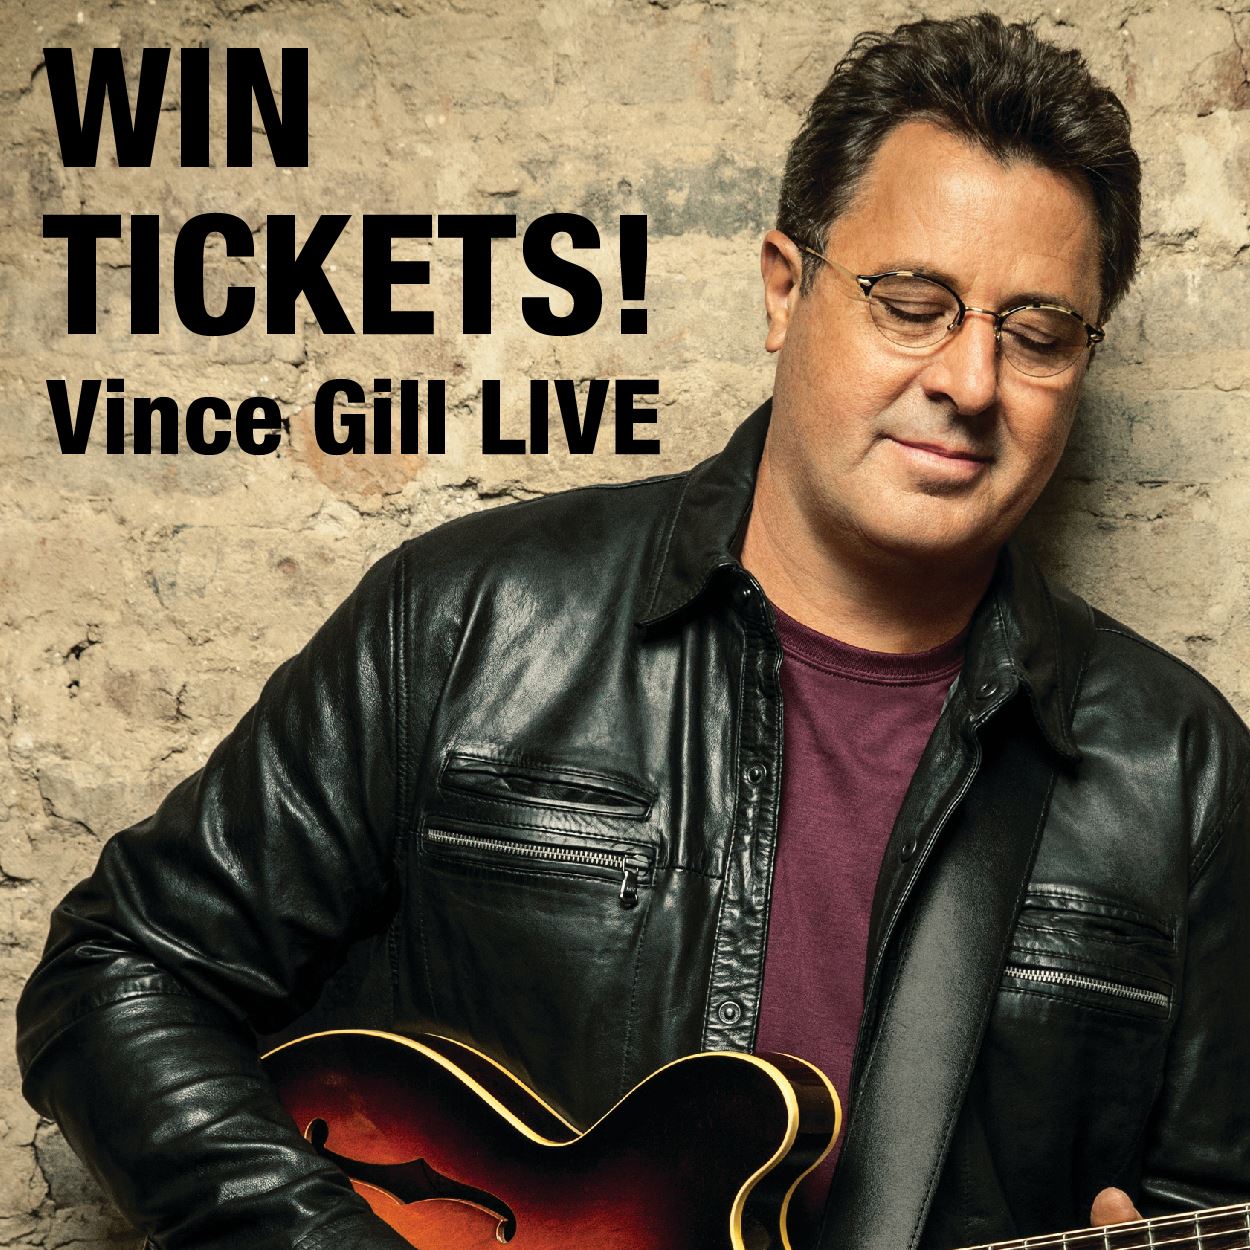 Win tickets to see Vince Gill LIVE at the Chicago Theatre. 